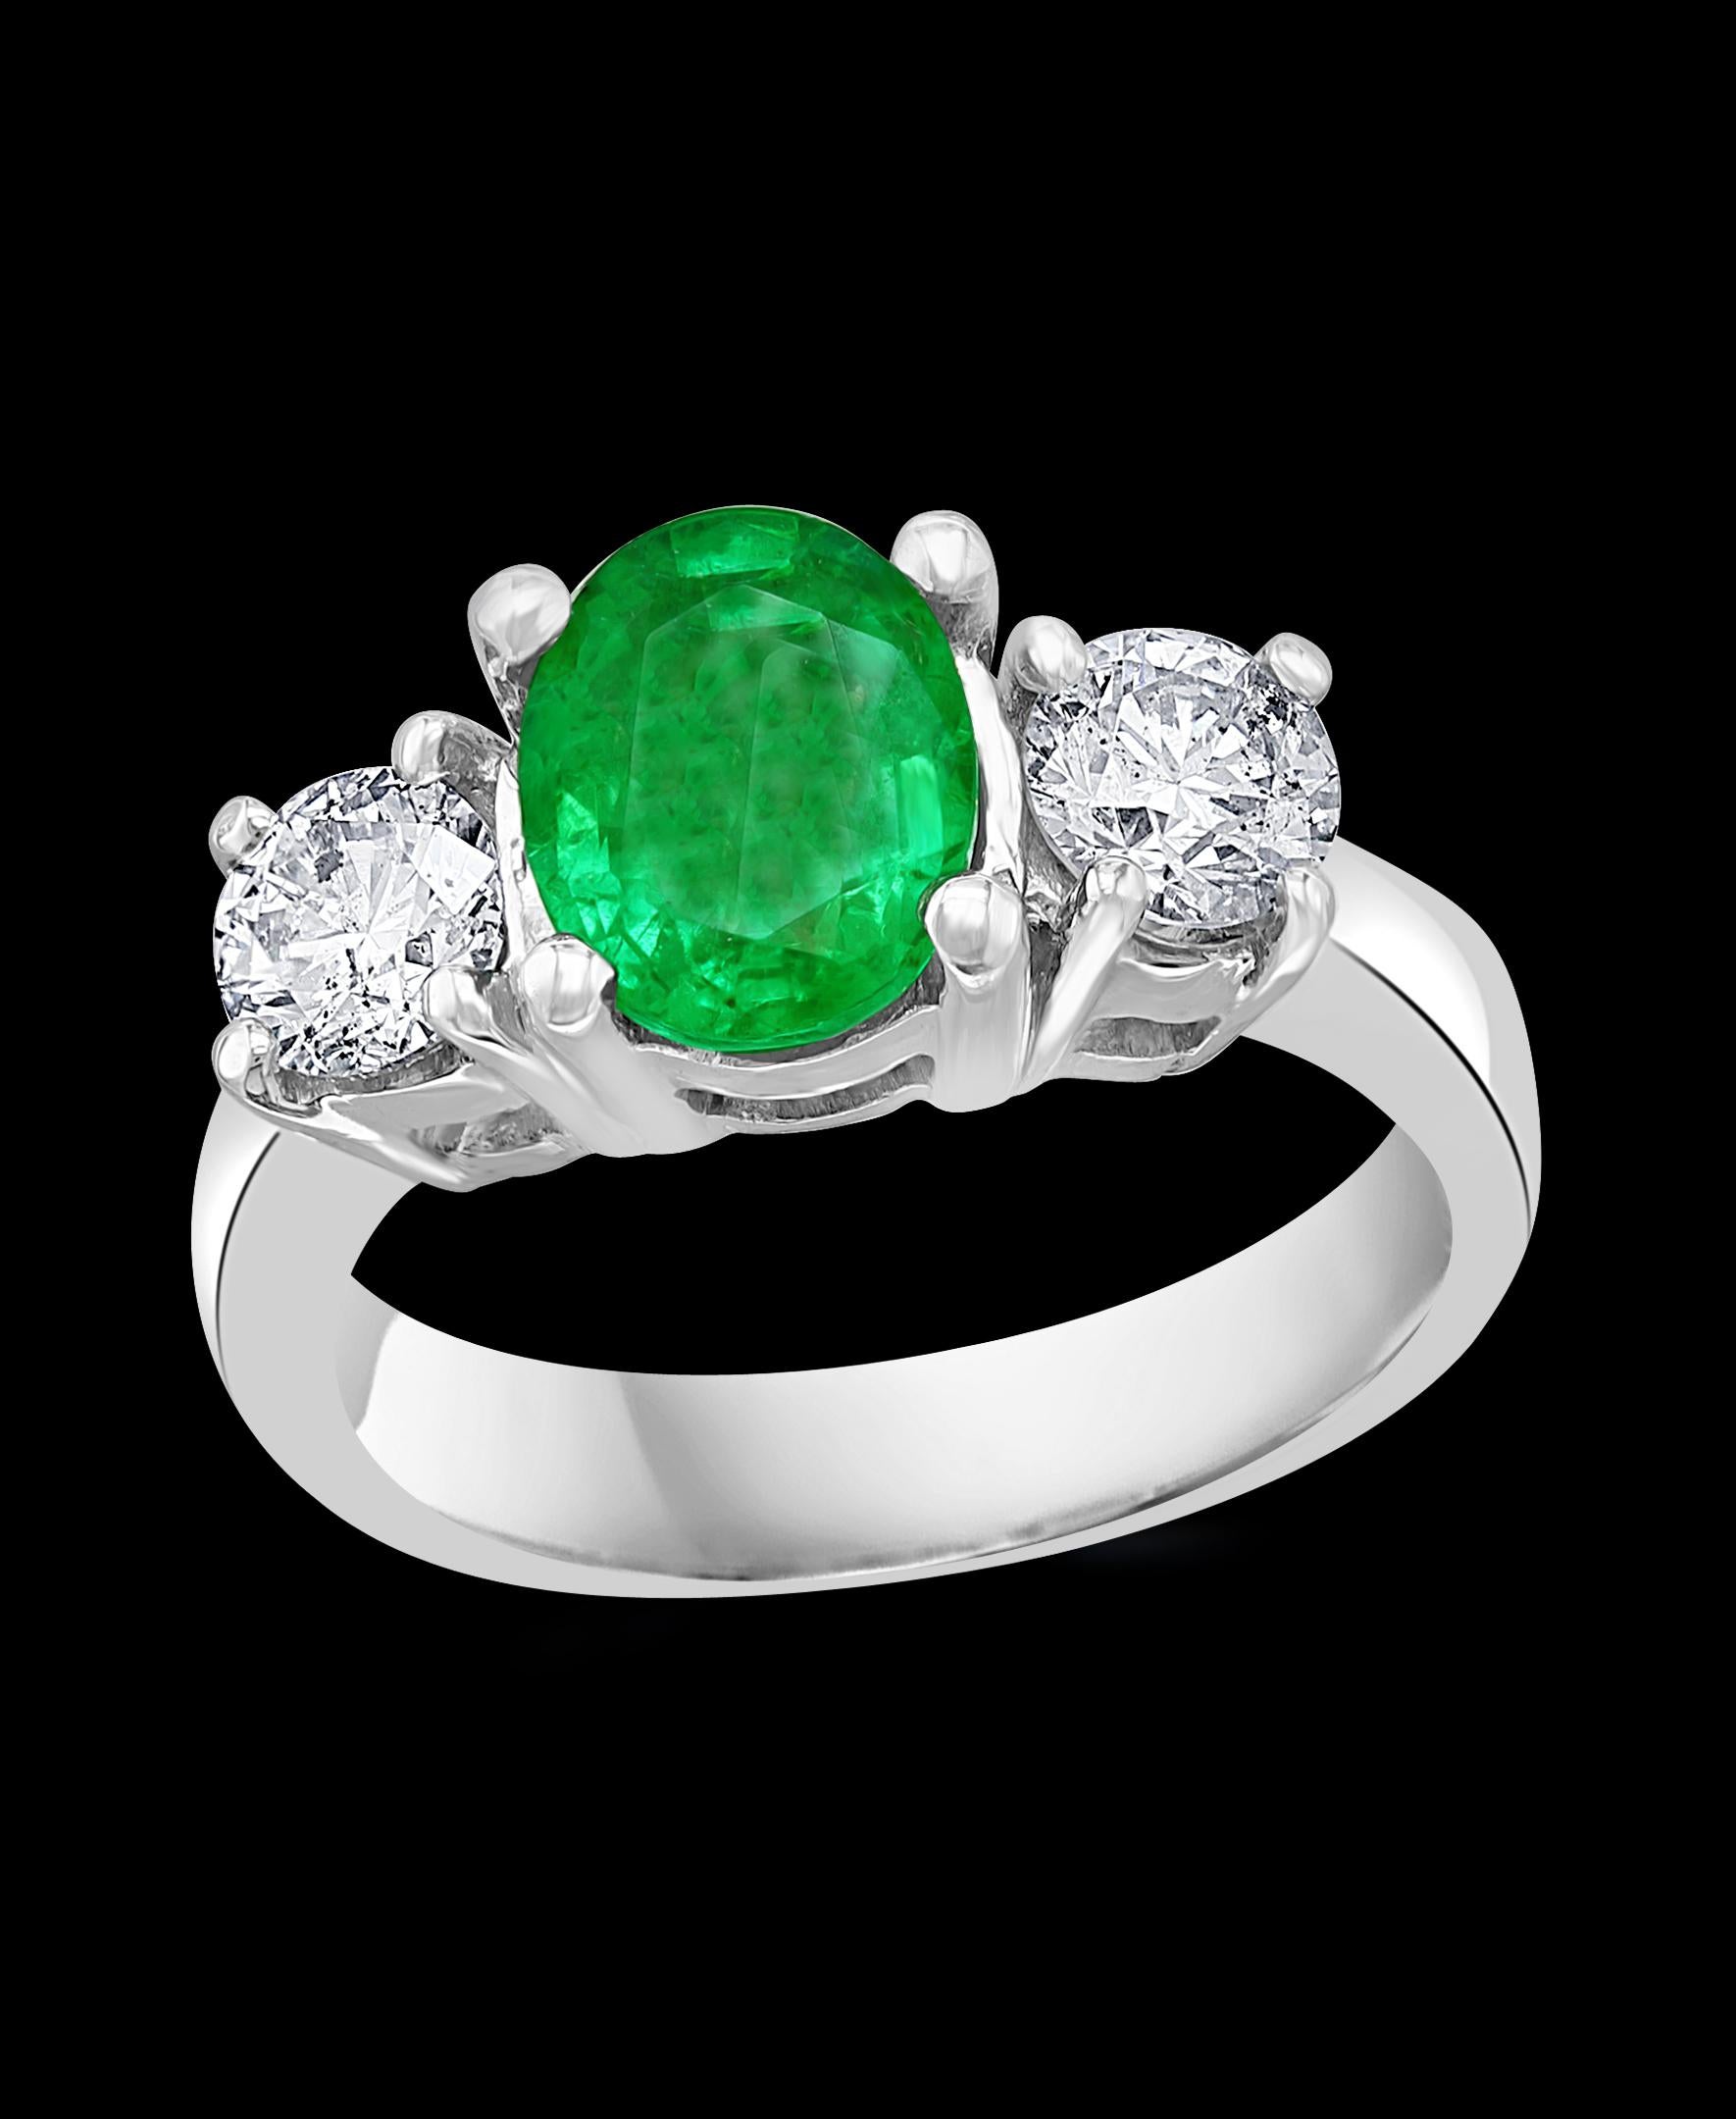 
1.8 Carat Oval Cut  Emerald & 0.90 Ct Diamond Ring In Platinum
A Classic, ring 
1.8 Carat exact weight   Emerald Absolutely gorgeous emerald , Very desirable  but  in color , Extreme fine quality ,color and luster
Clarity is very nice but has black